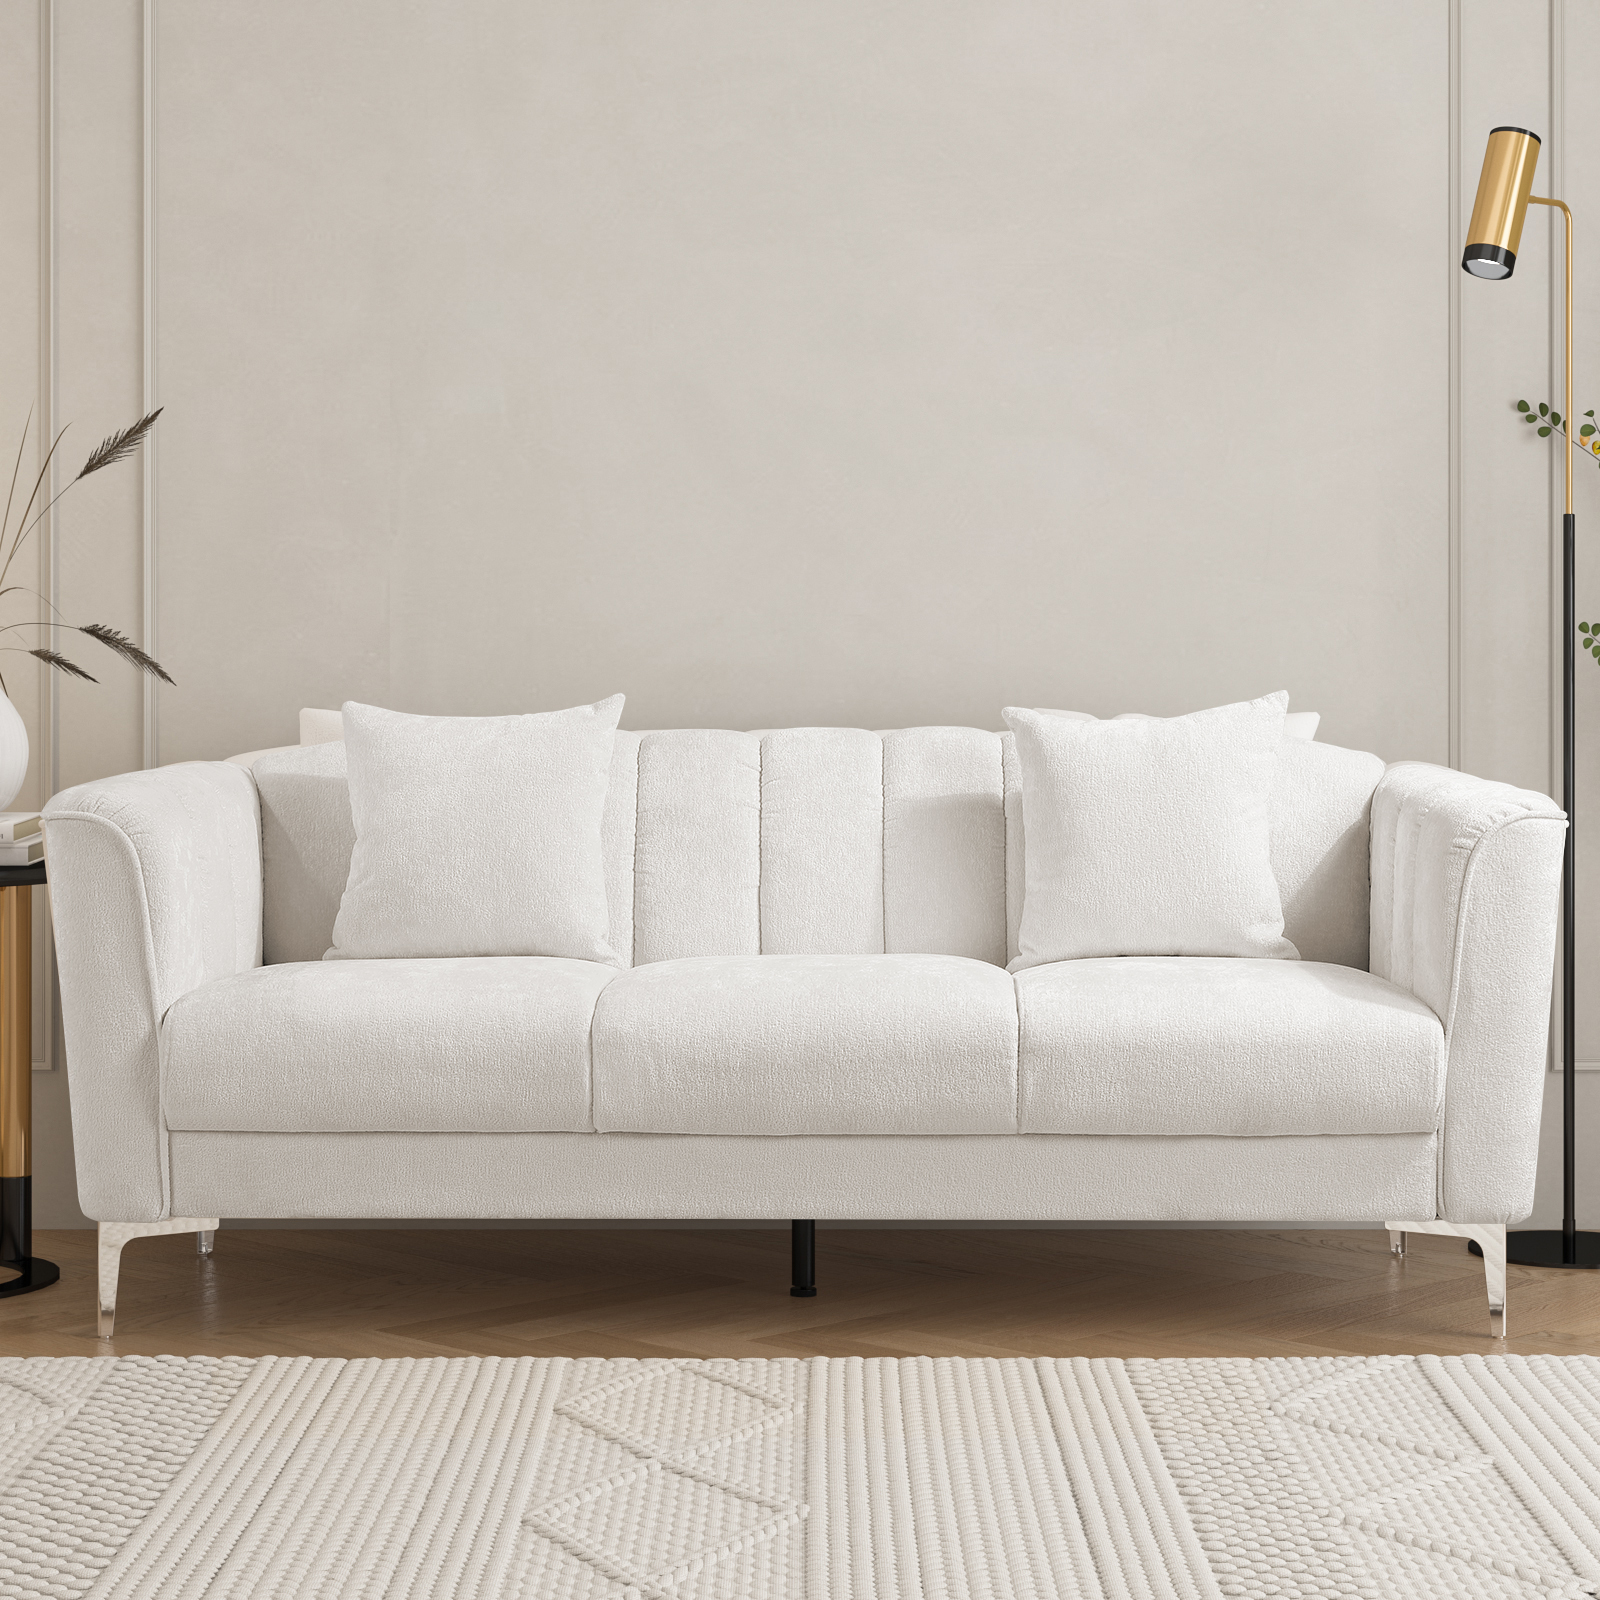 Homfa White Sofa and Couch, 77.2" Modern Chenille Couch with Armrests, Wood Sofa with Pocket and Stainless Steel Legs - image 1 of 11